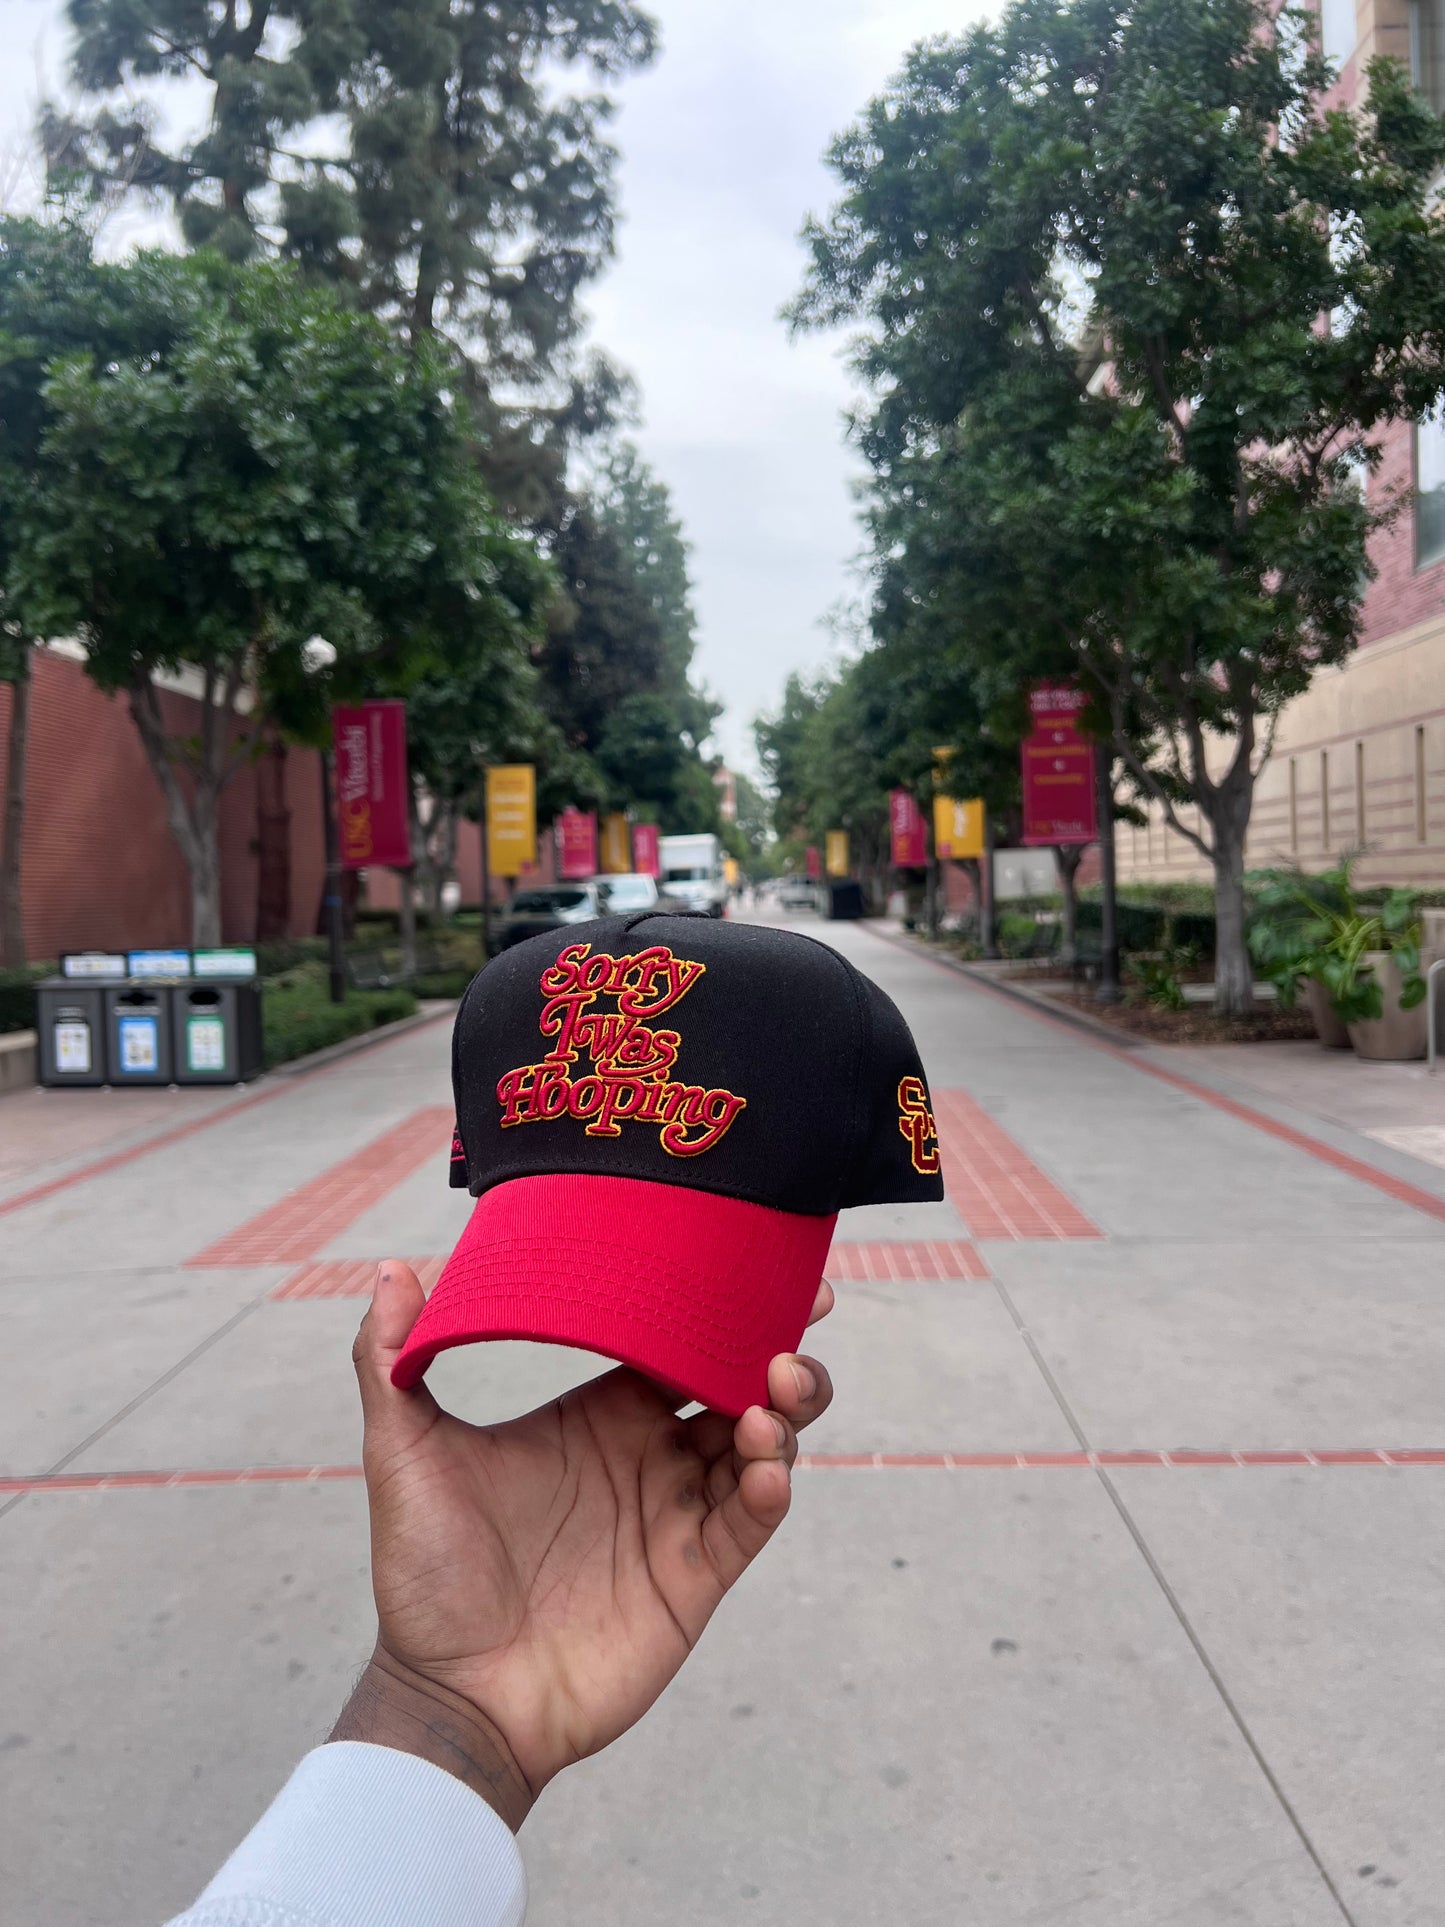 (USC) SORRY I WAS HOOPING HATS